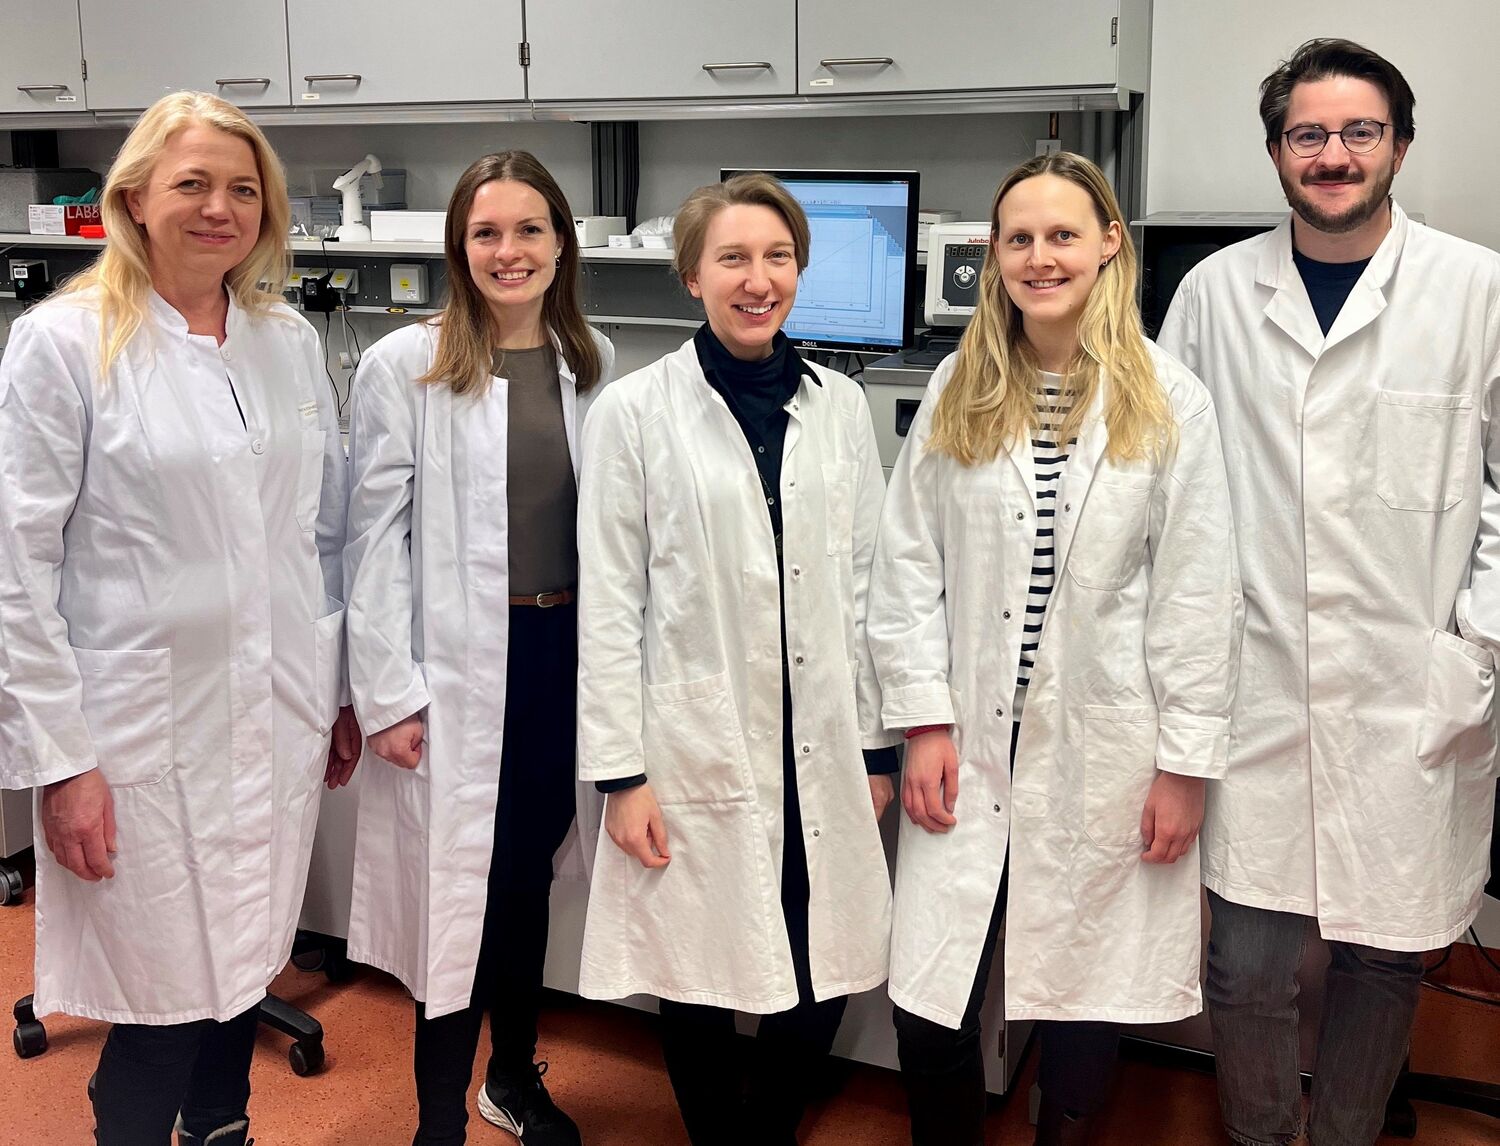 Researchers involved in the study from Göttingen University and University Medical Center Göttingen (UMG): Antje Dickmanns, Kim Maren Klein (née Stegmann), Lisa-Marie Funk, Marie Wensien and Fabian Rabe von Pappenheim (from left to right).